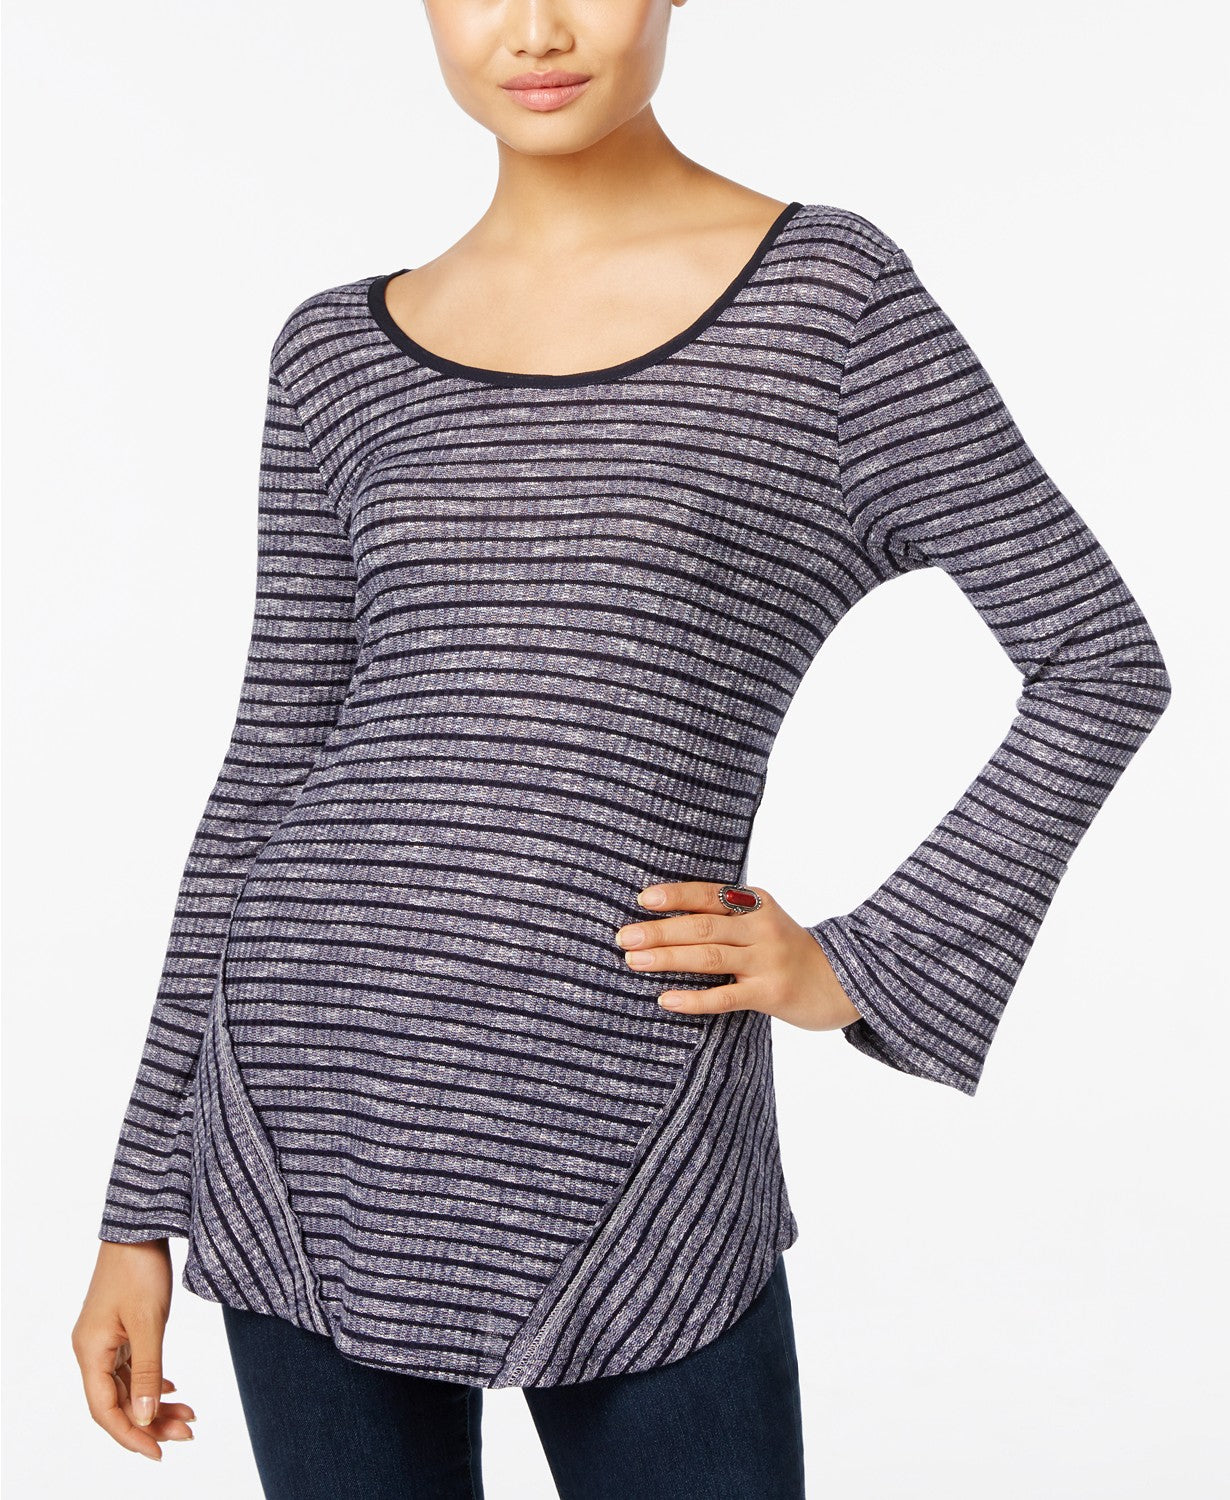 Style Co Petite Striped Bell-Sleeve Top Navy Stripe PXL